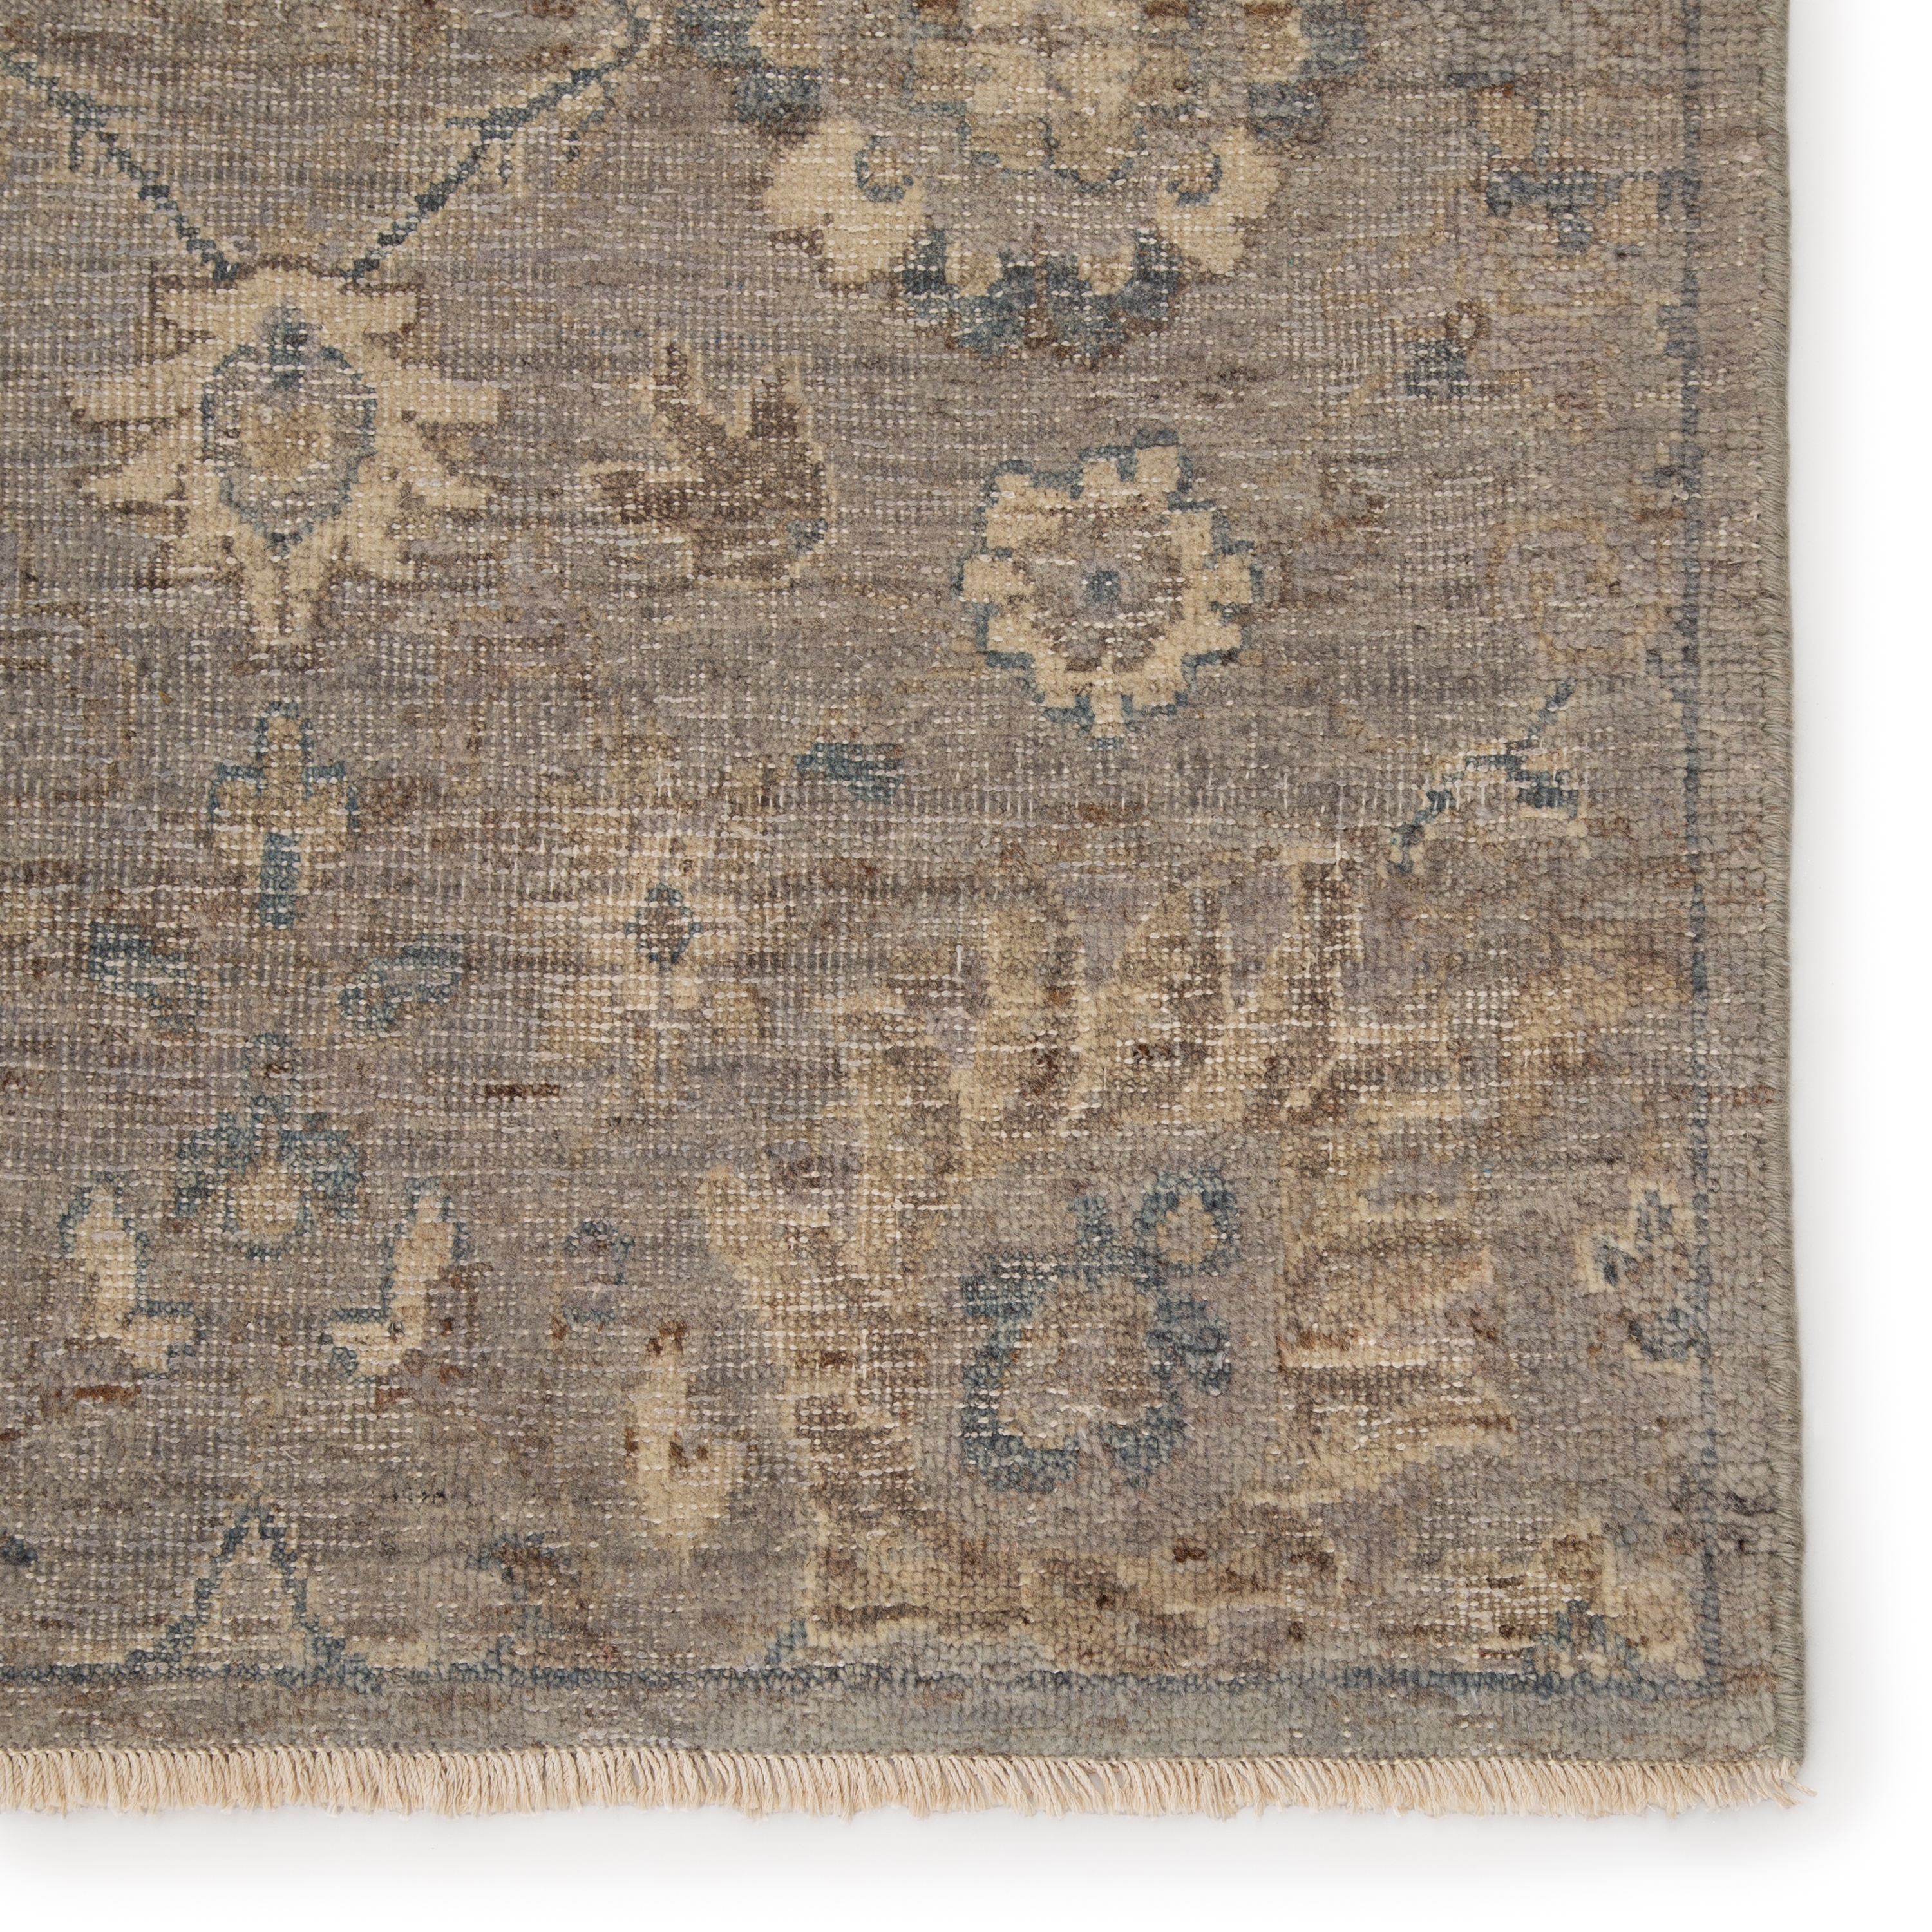 Pembe Hand-Knotted Oriental Gray/ Blue Area Rug (10'X14') - Image 3